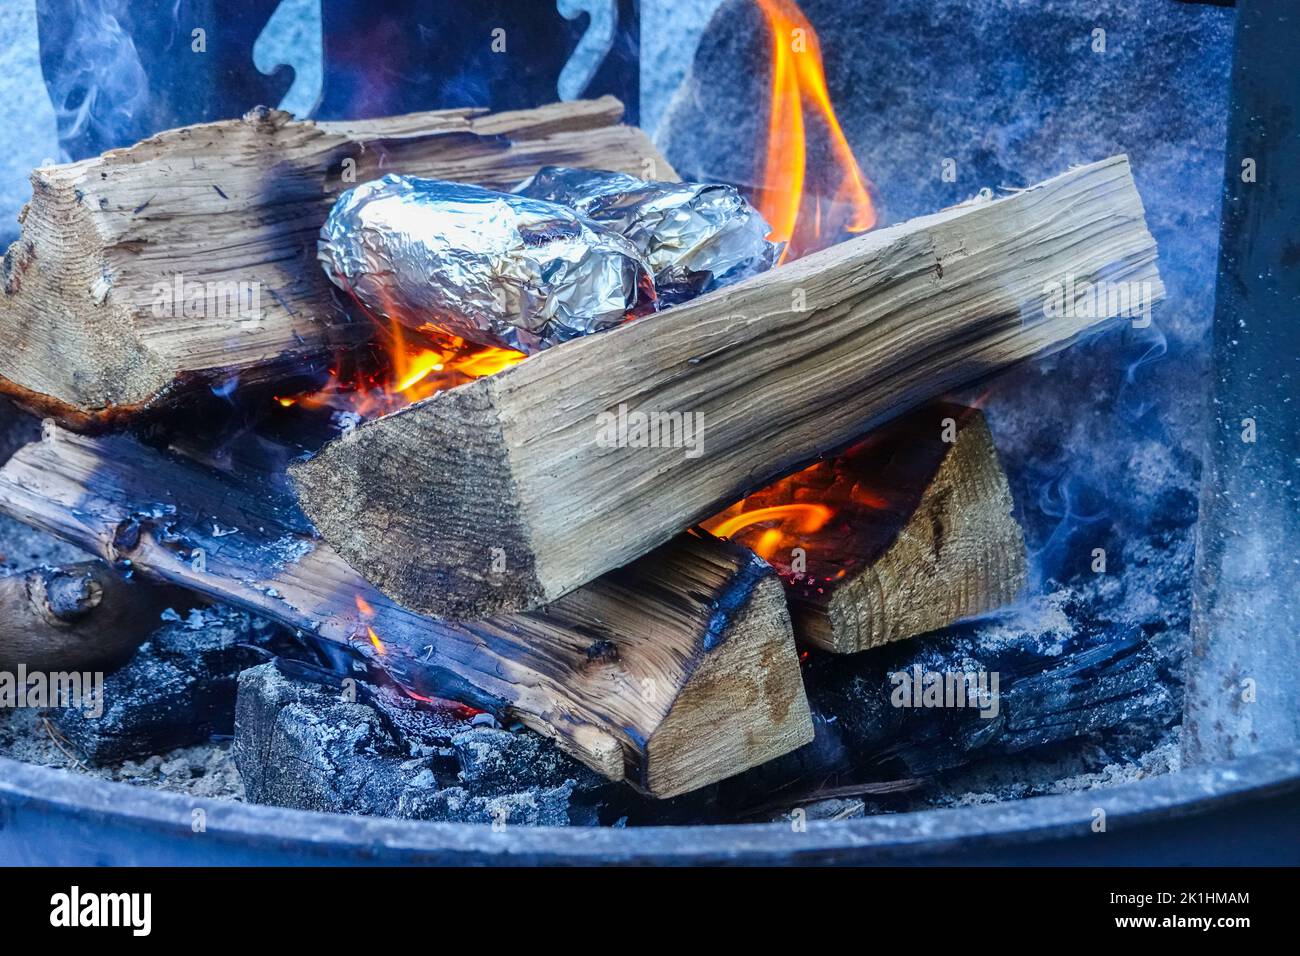 Baked potatoes cooking over a Wood campfire wrapped in foil. Stock Photo